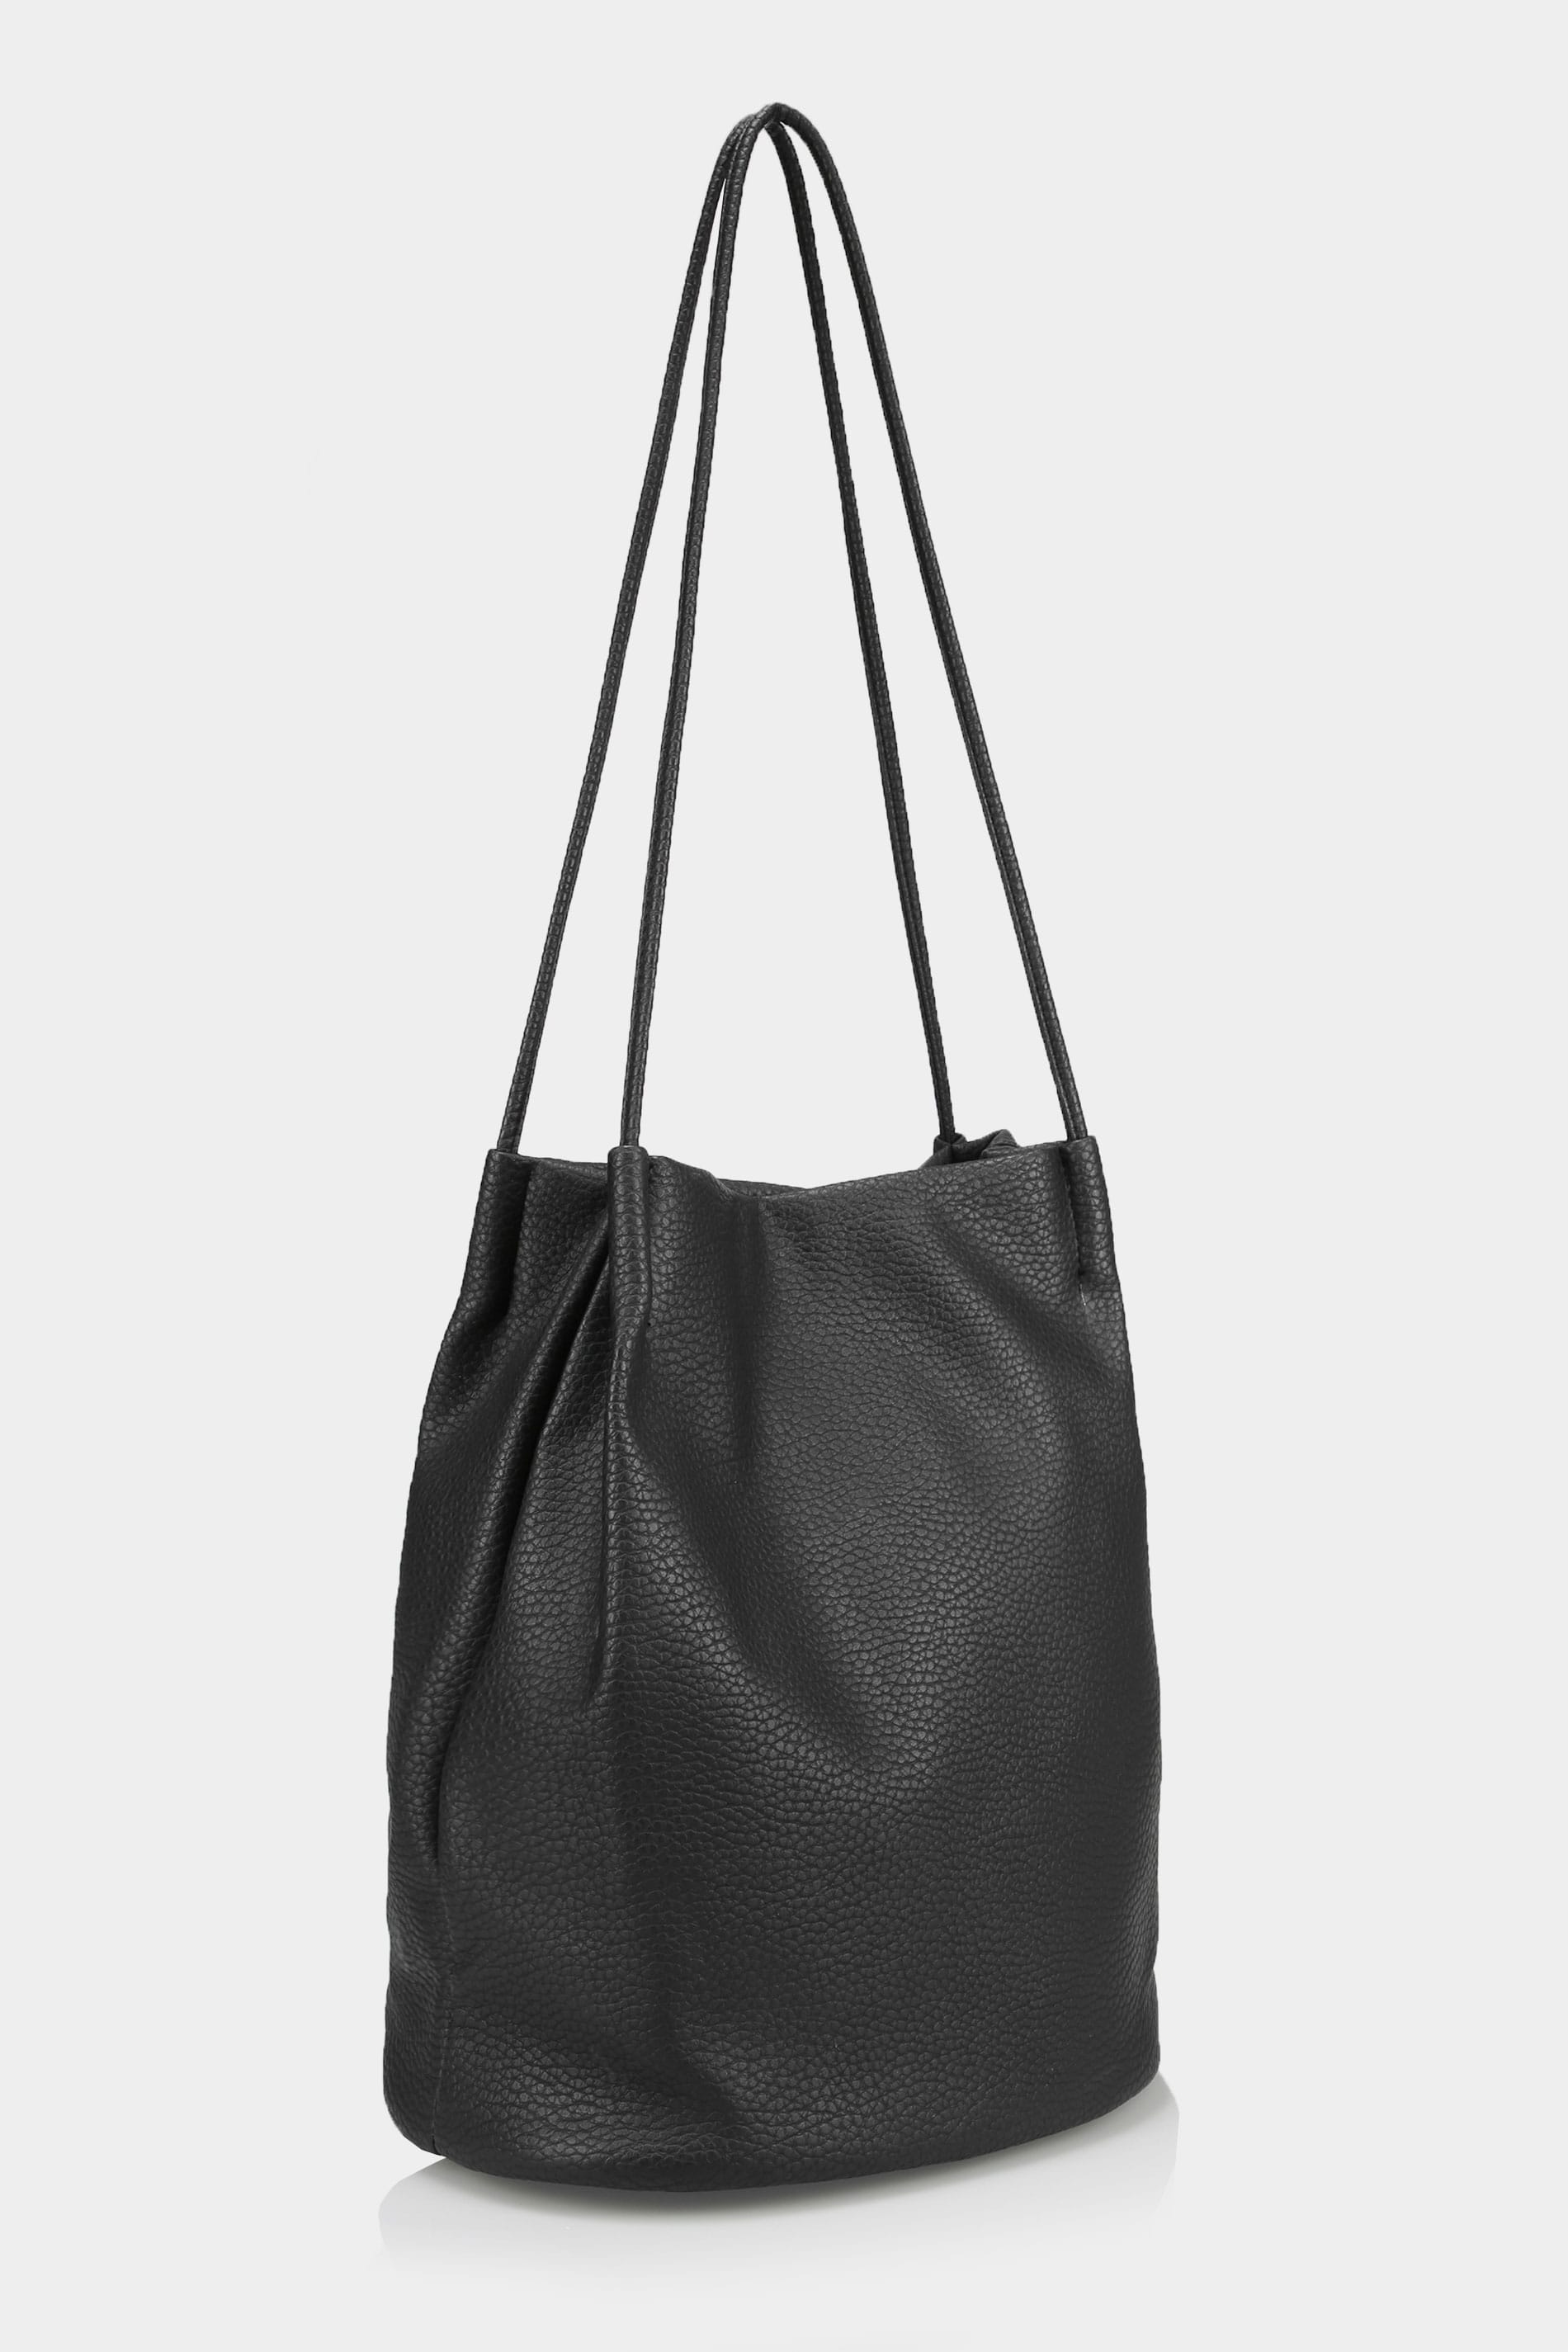 Black PU Leather Look Bucket Bag With Double Handles